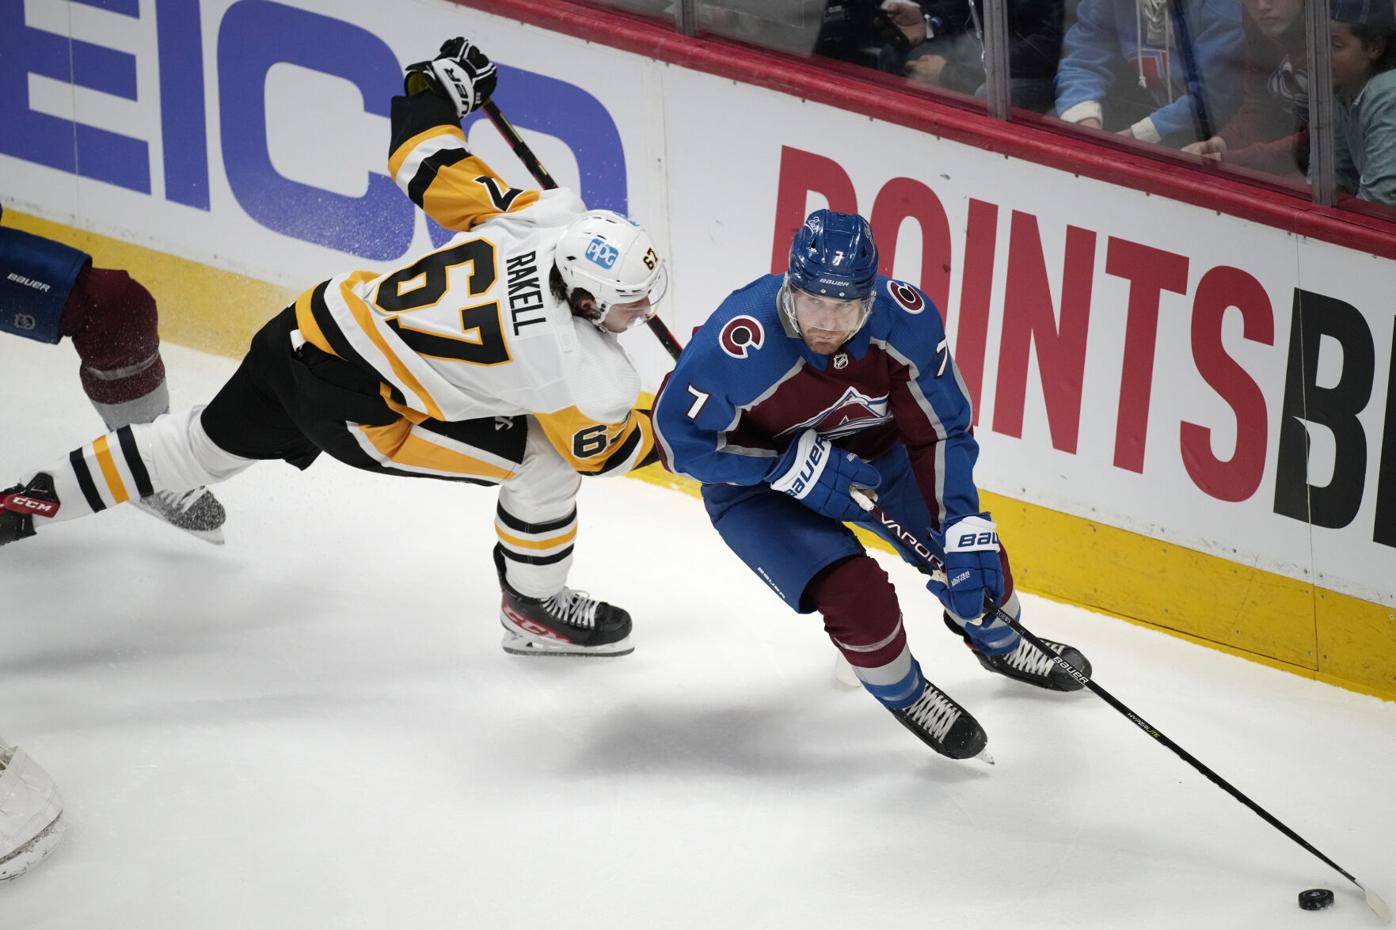 Paul Klee: Love the spirit, but Colorado Avalanche need Nathan MacKinnon to  never fight again, Paul Klee